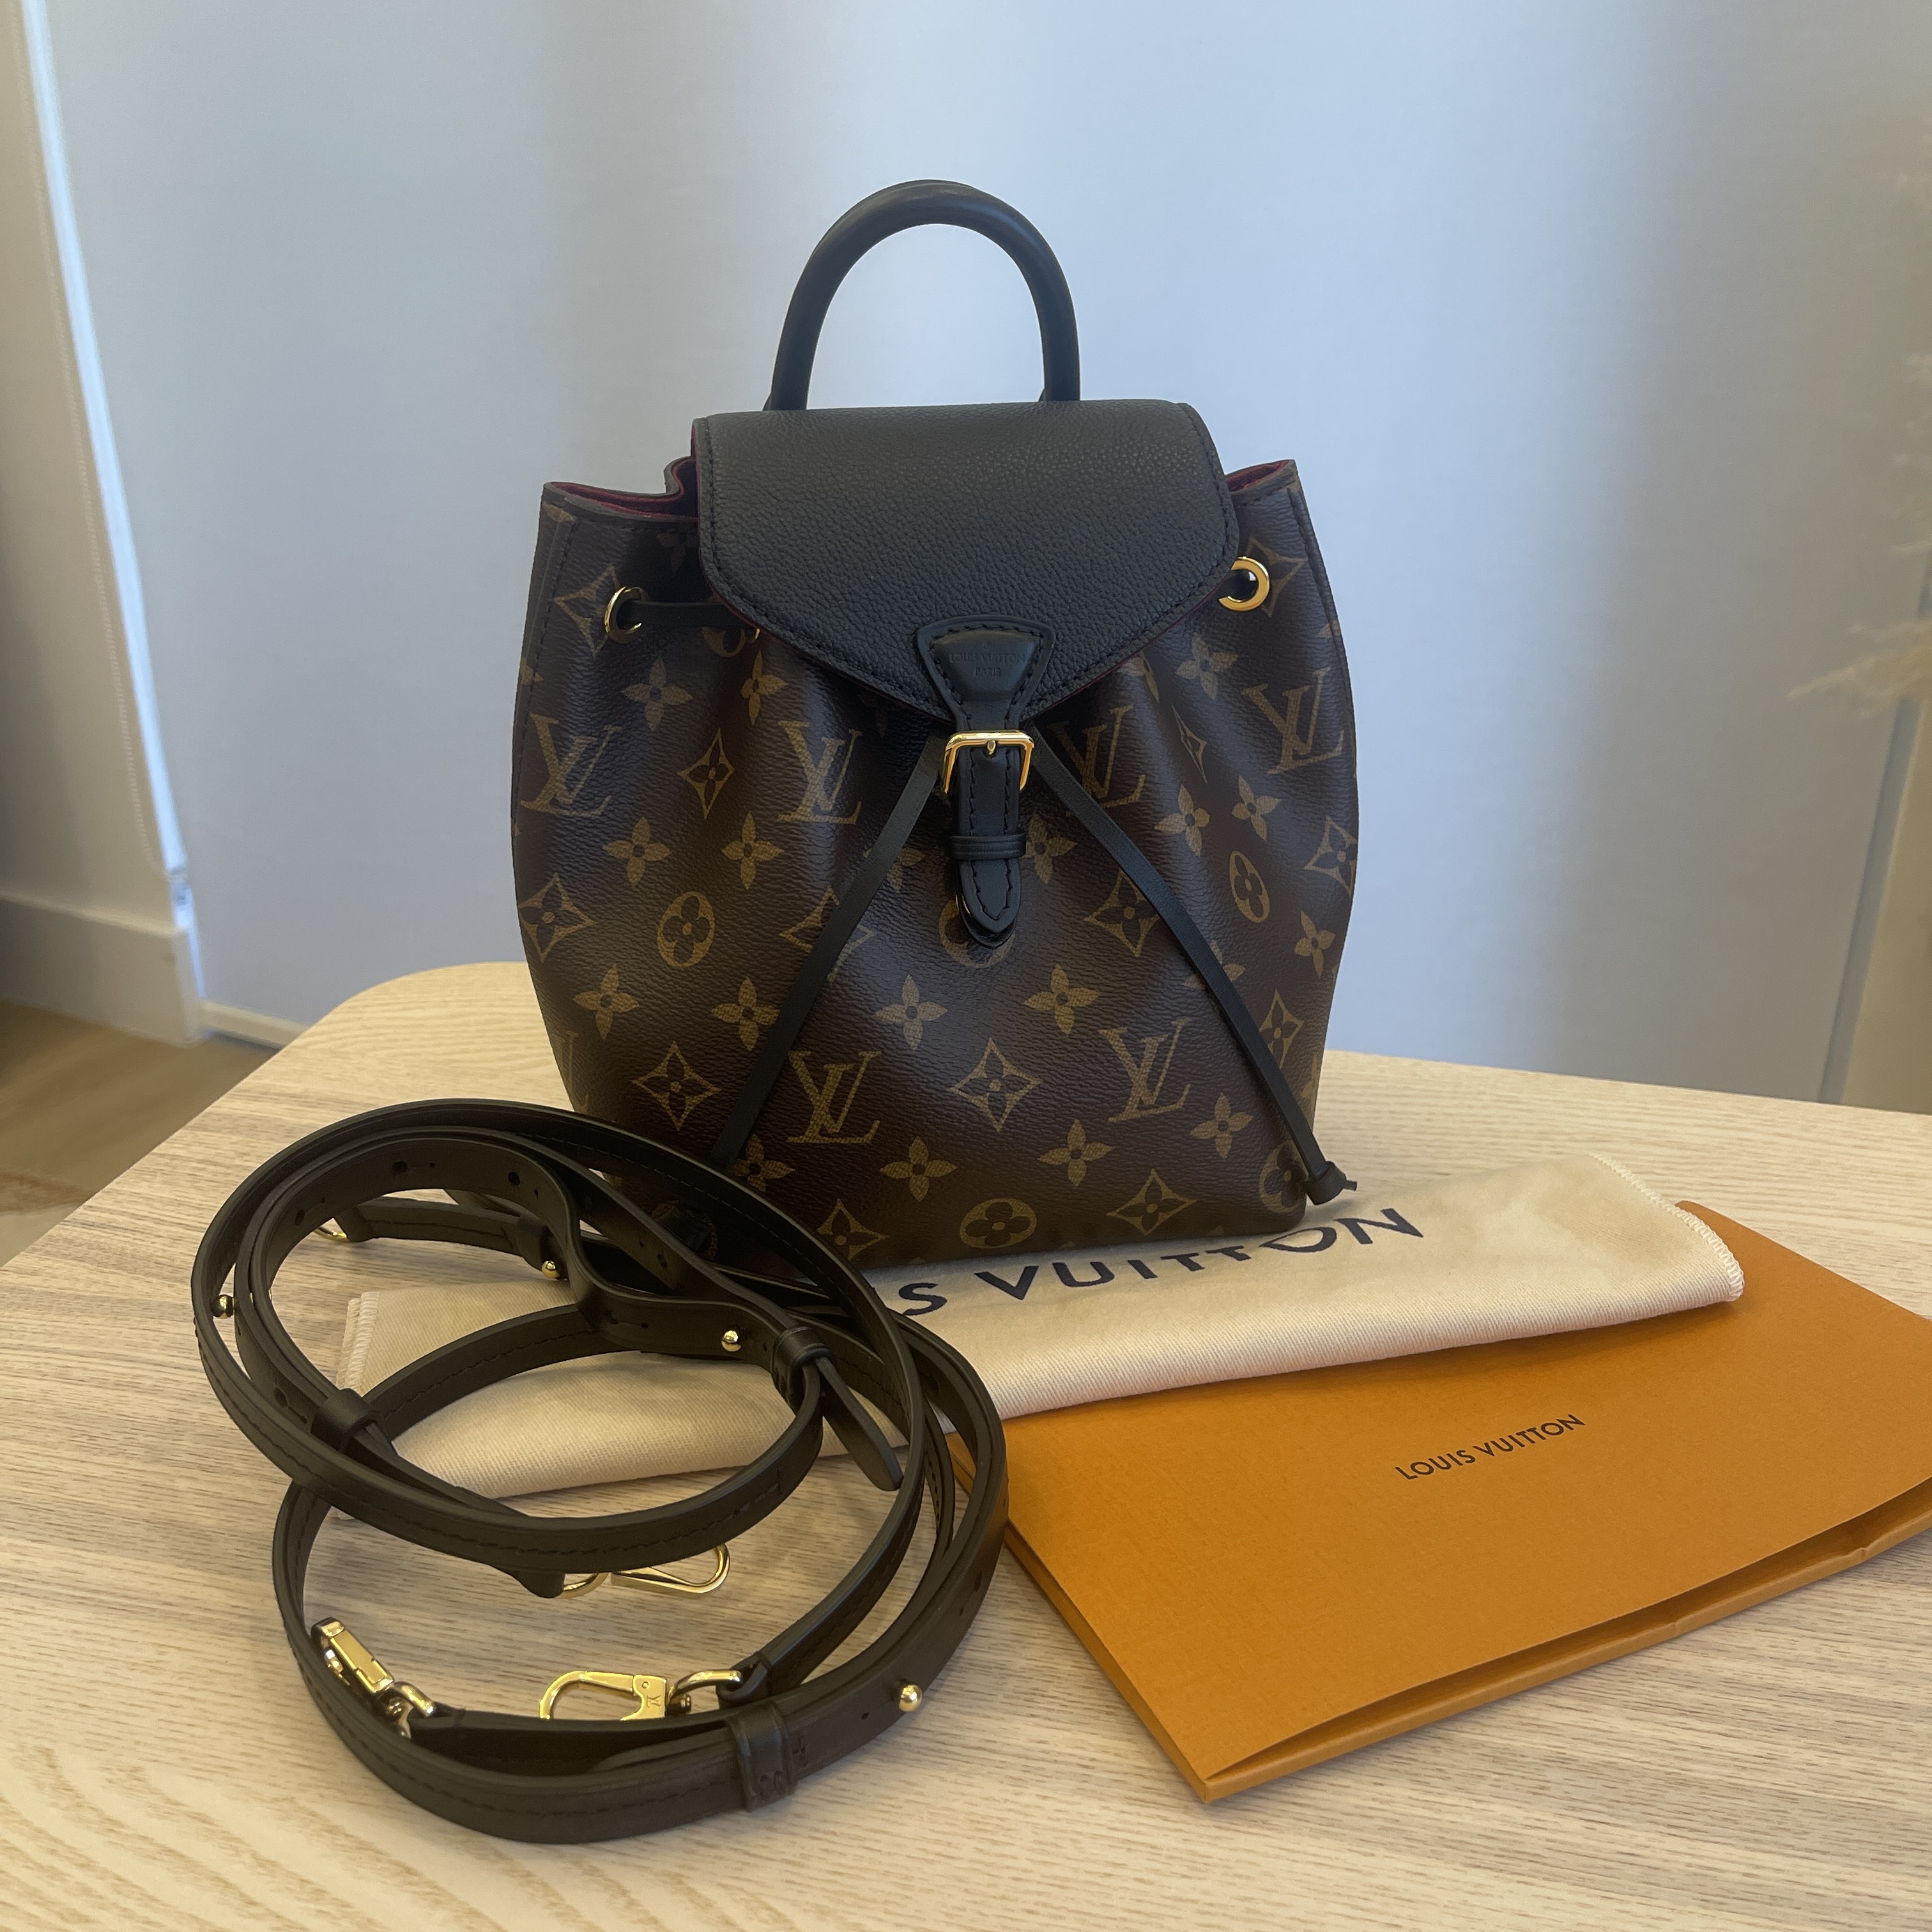 LOUIS VUITTON MONTSOURIS BB UPDATED REVIEW! 1.5 YEARS + WEAR AND